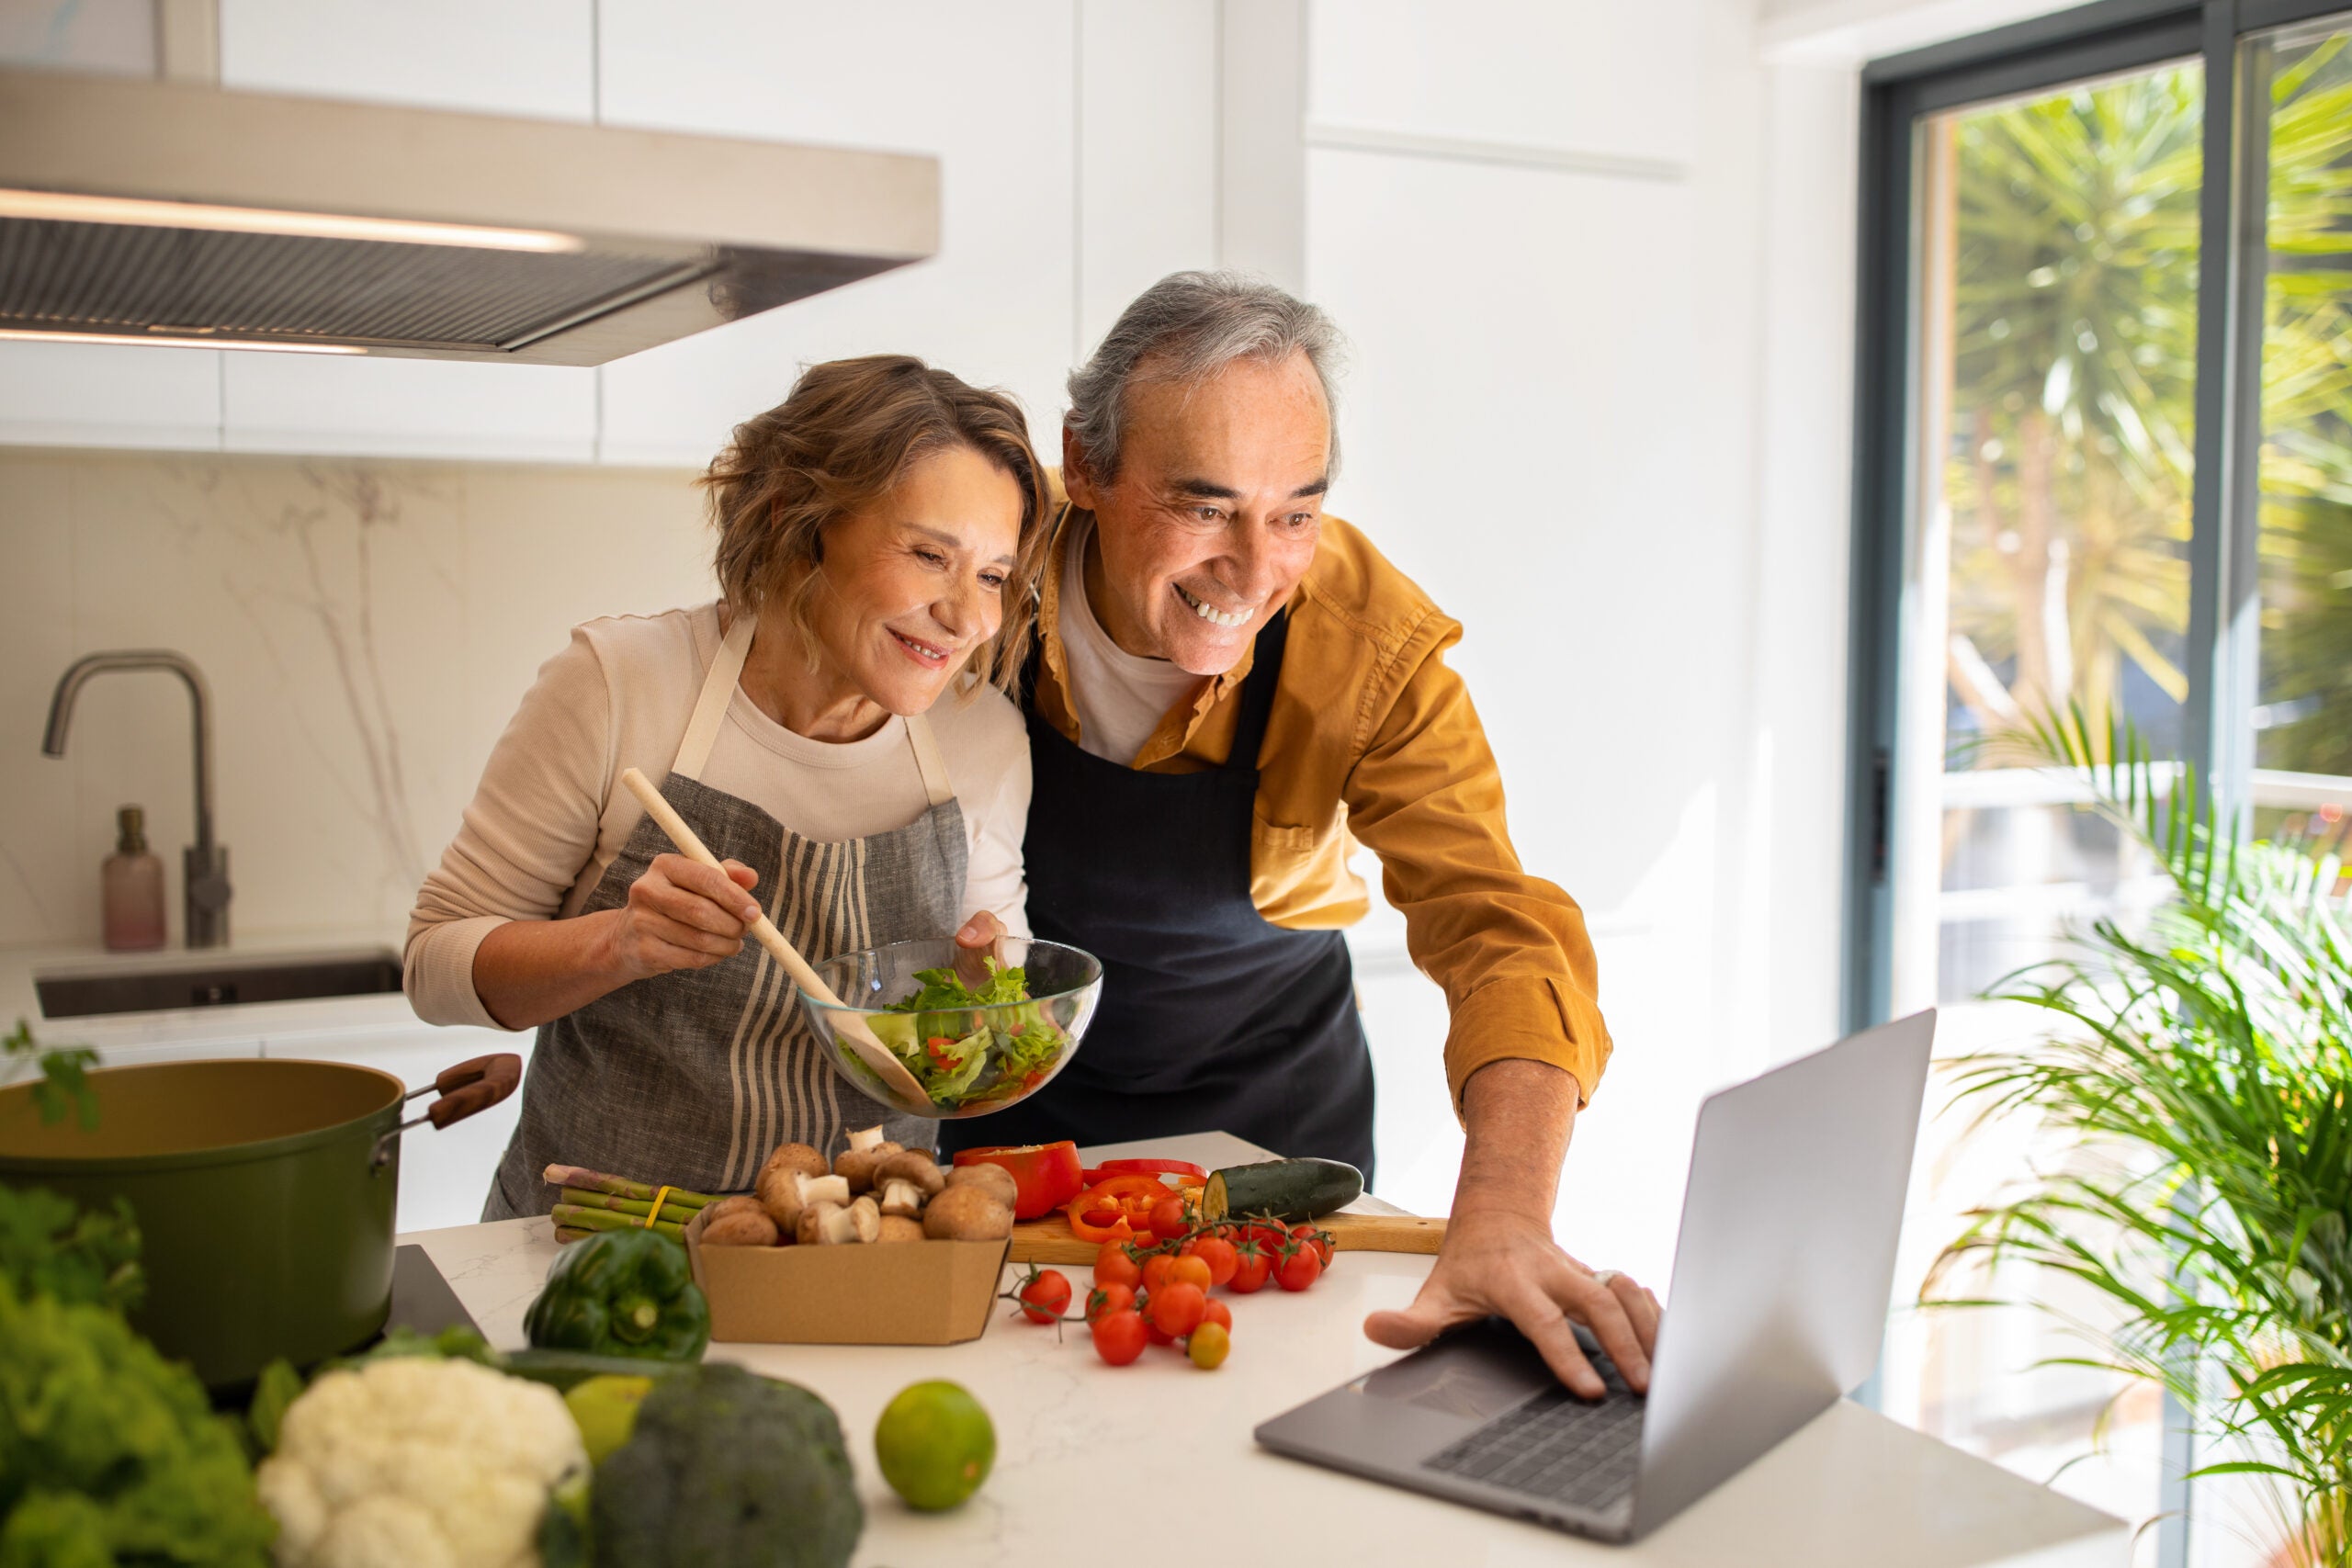 Iddle aged couple smiling and cooking in kitchen together feeling empowered by the nutrition interventions her functional medicine doctor gave her.